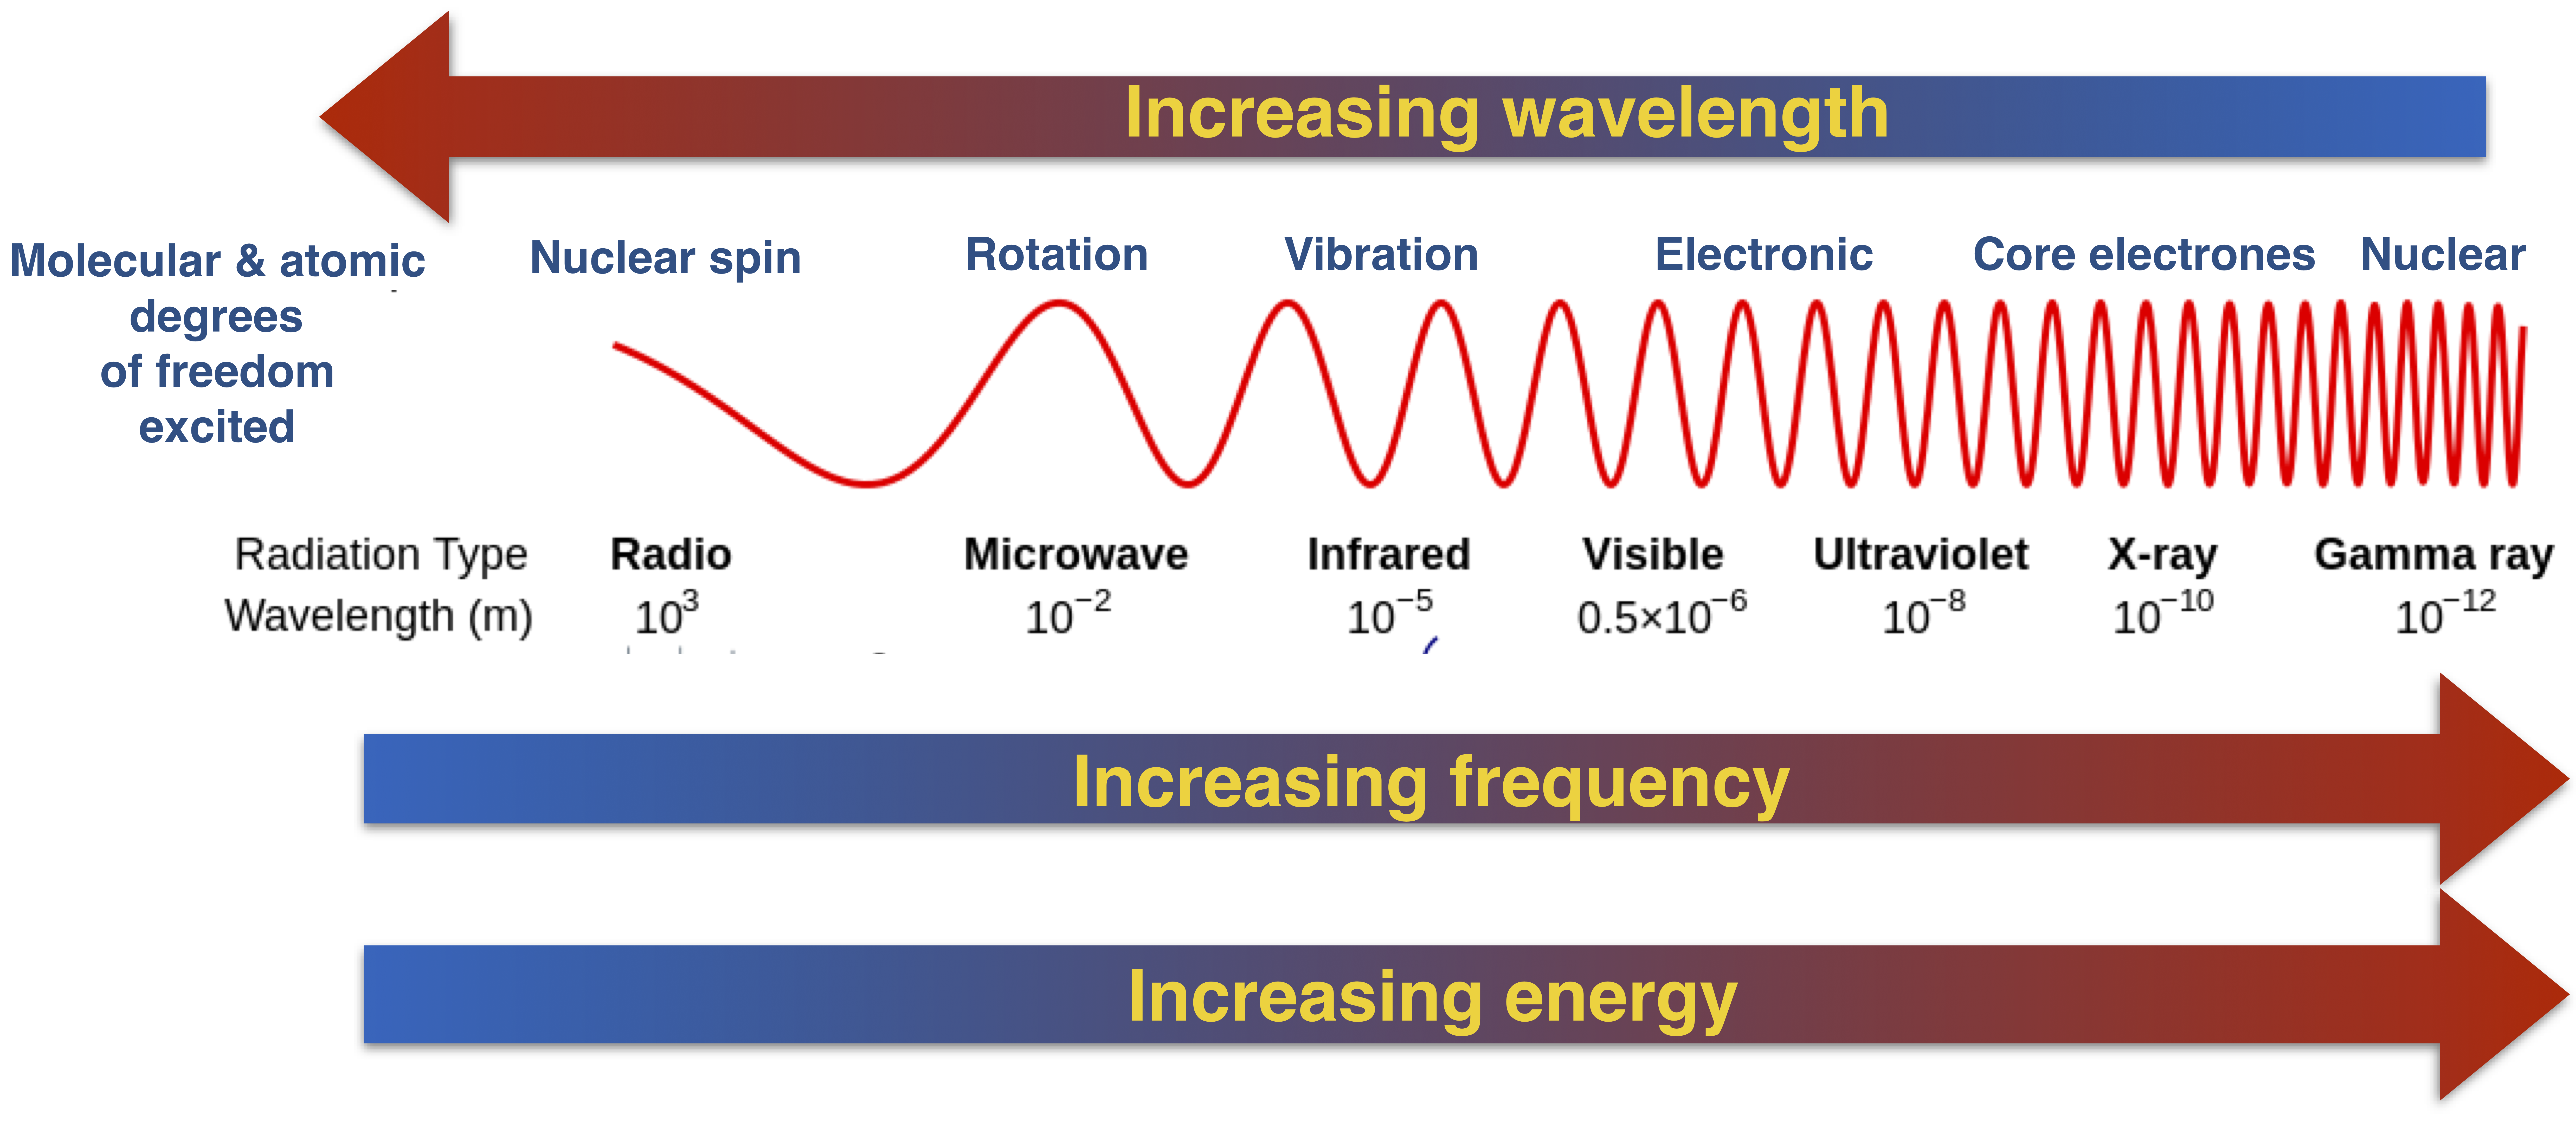 EM spectrum and excitable energy states corresponding to each frequency region